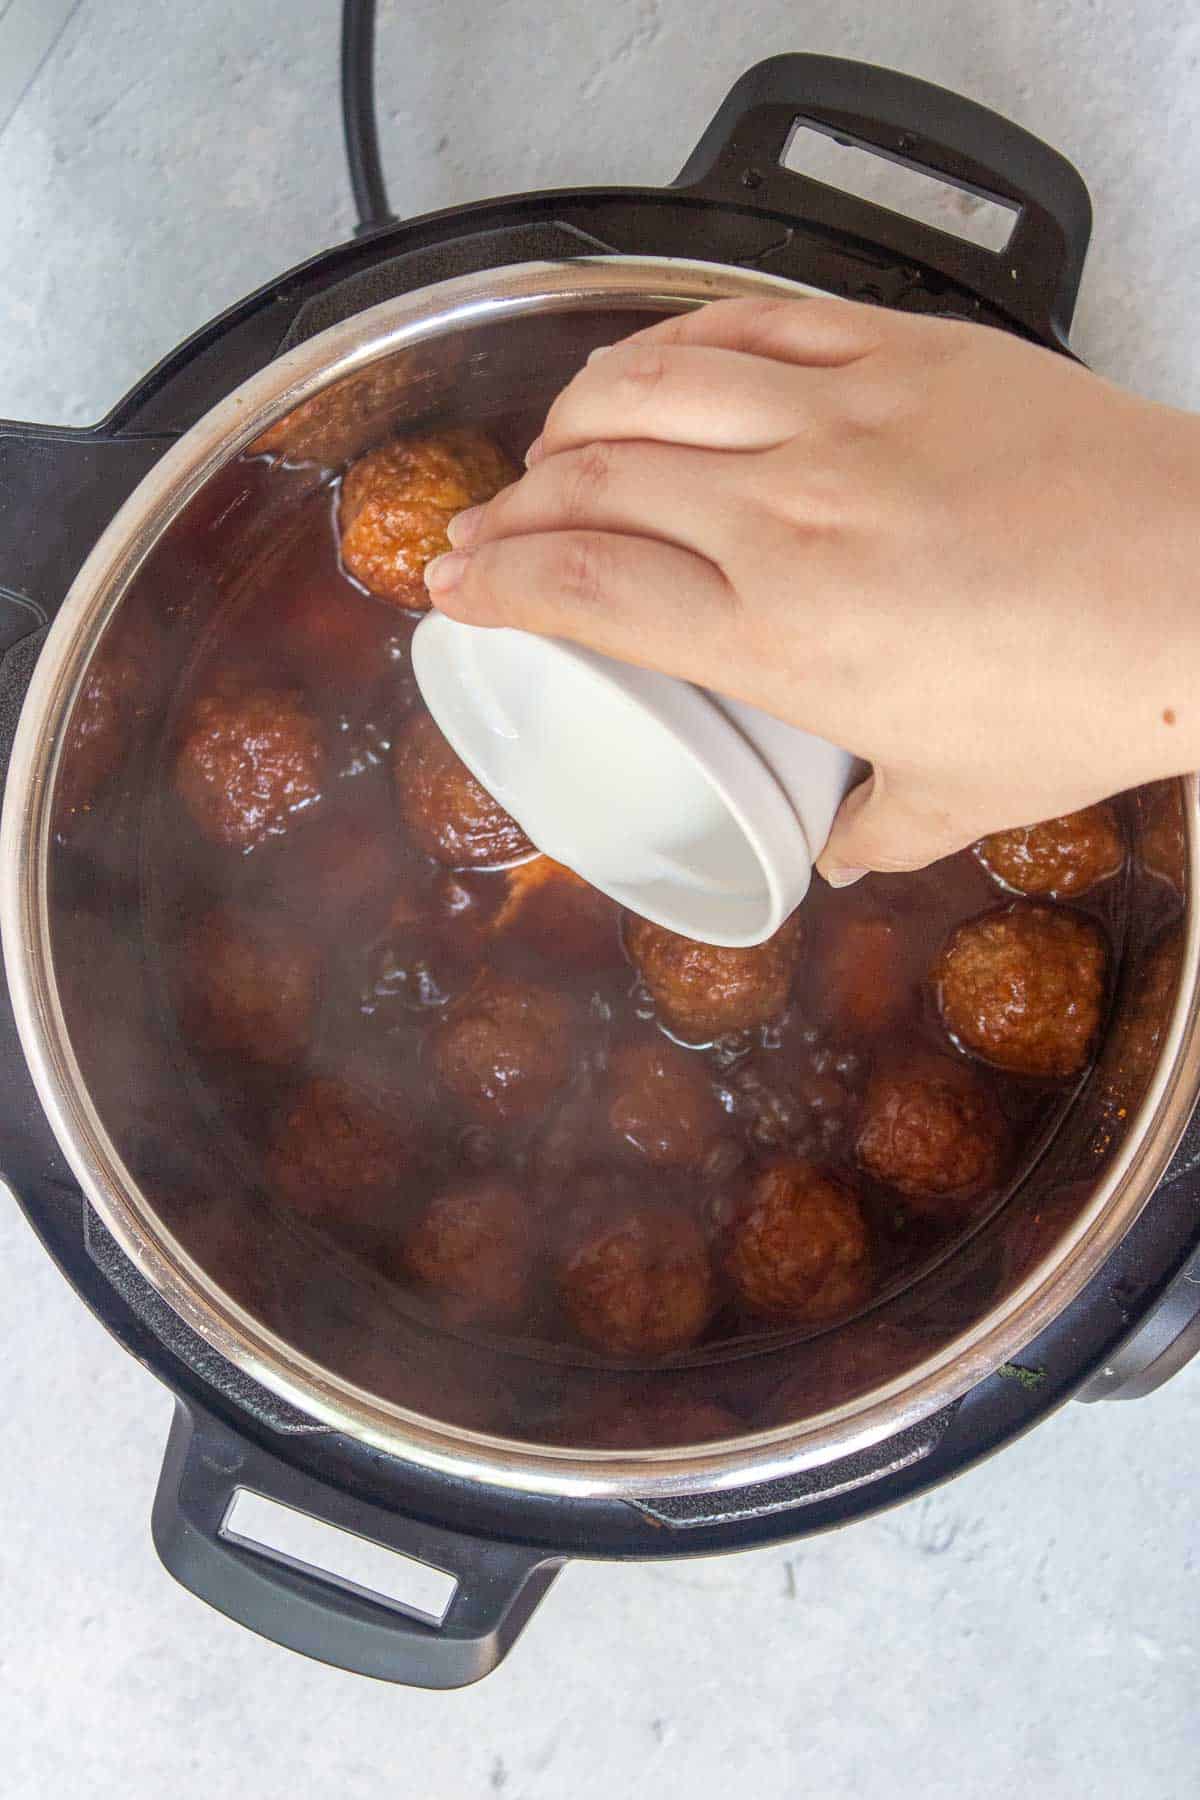 Pouring a cornstarch slurry over the meatballs in the Instant Pot